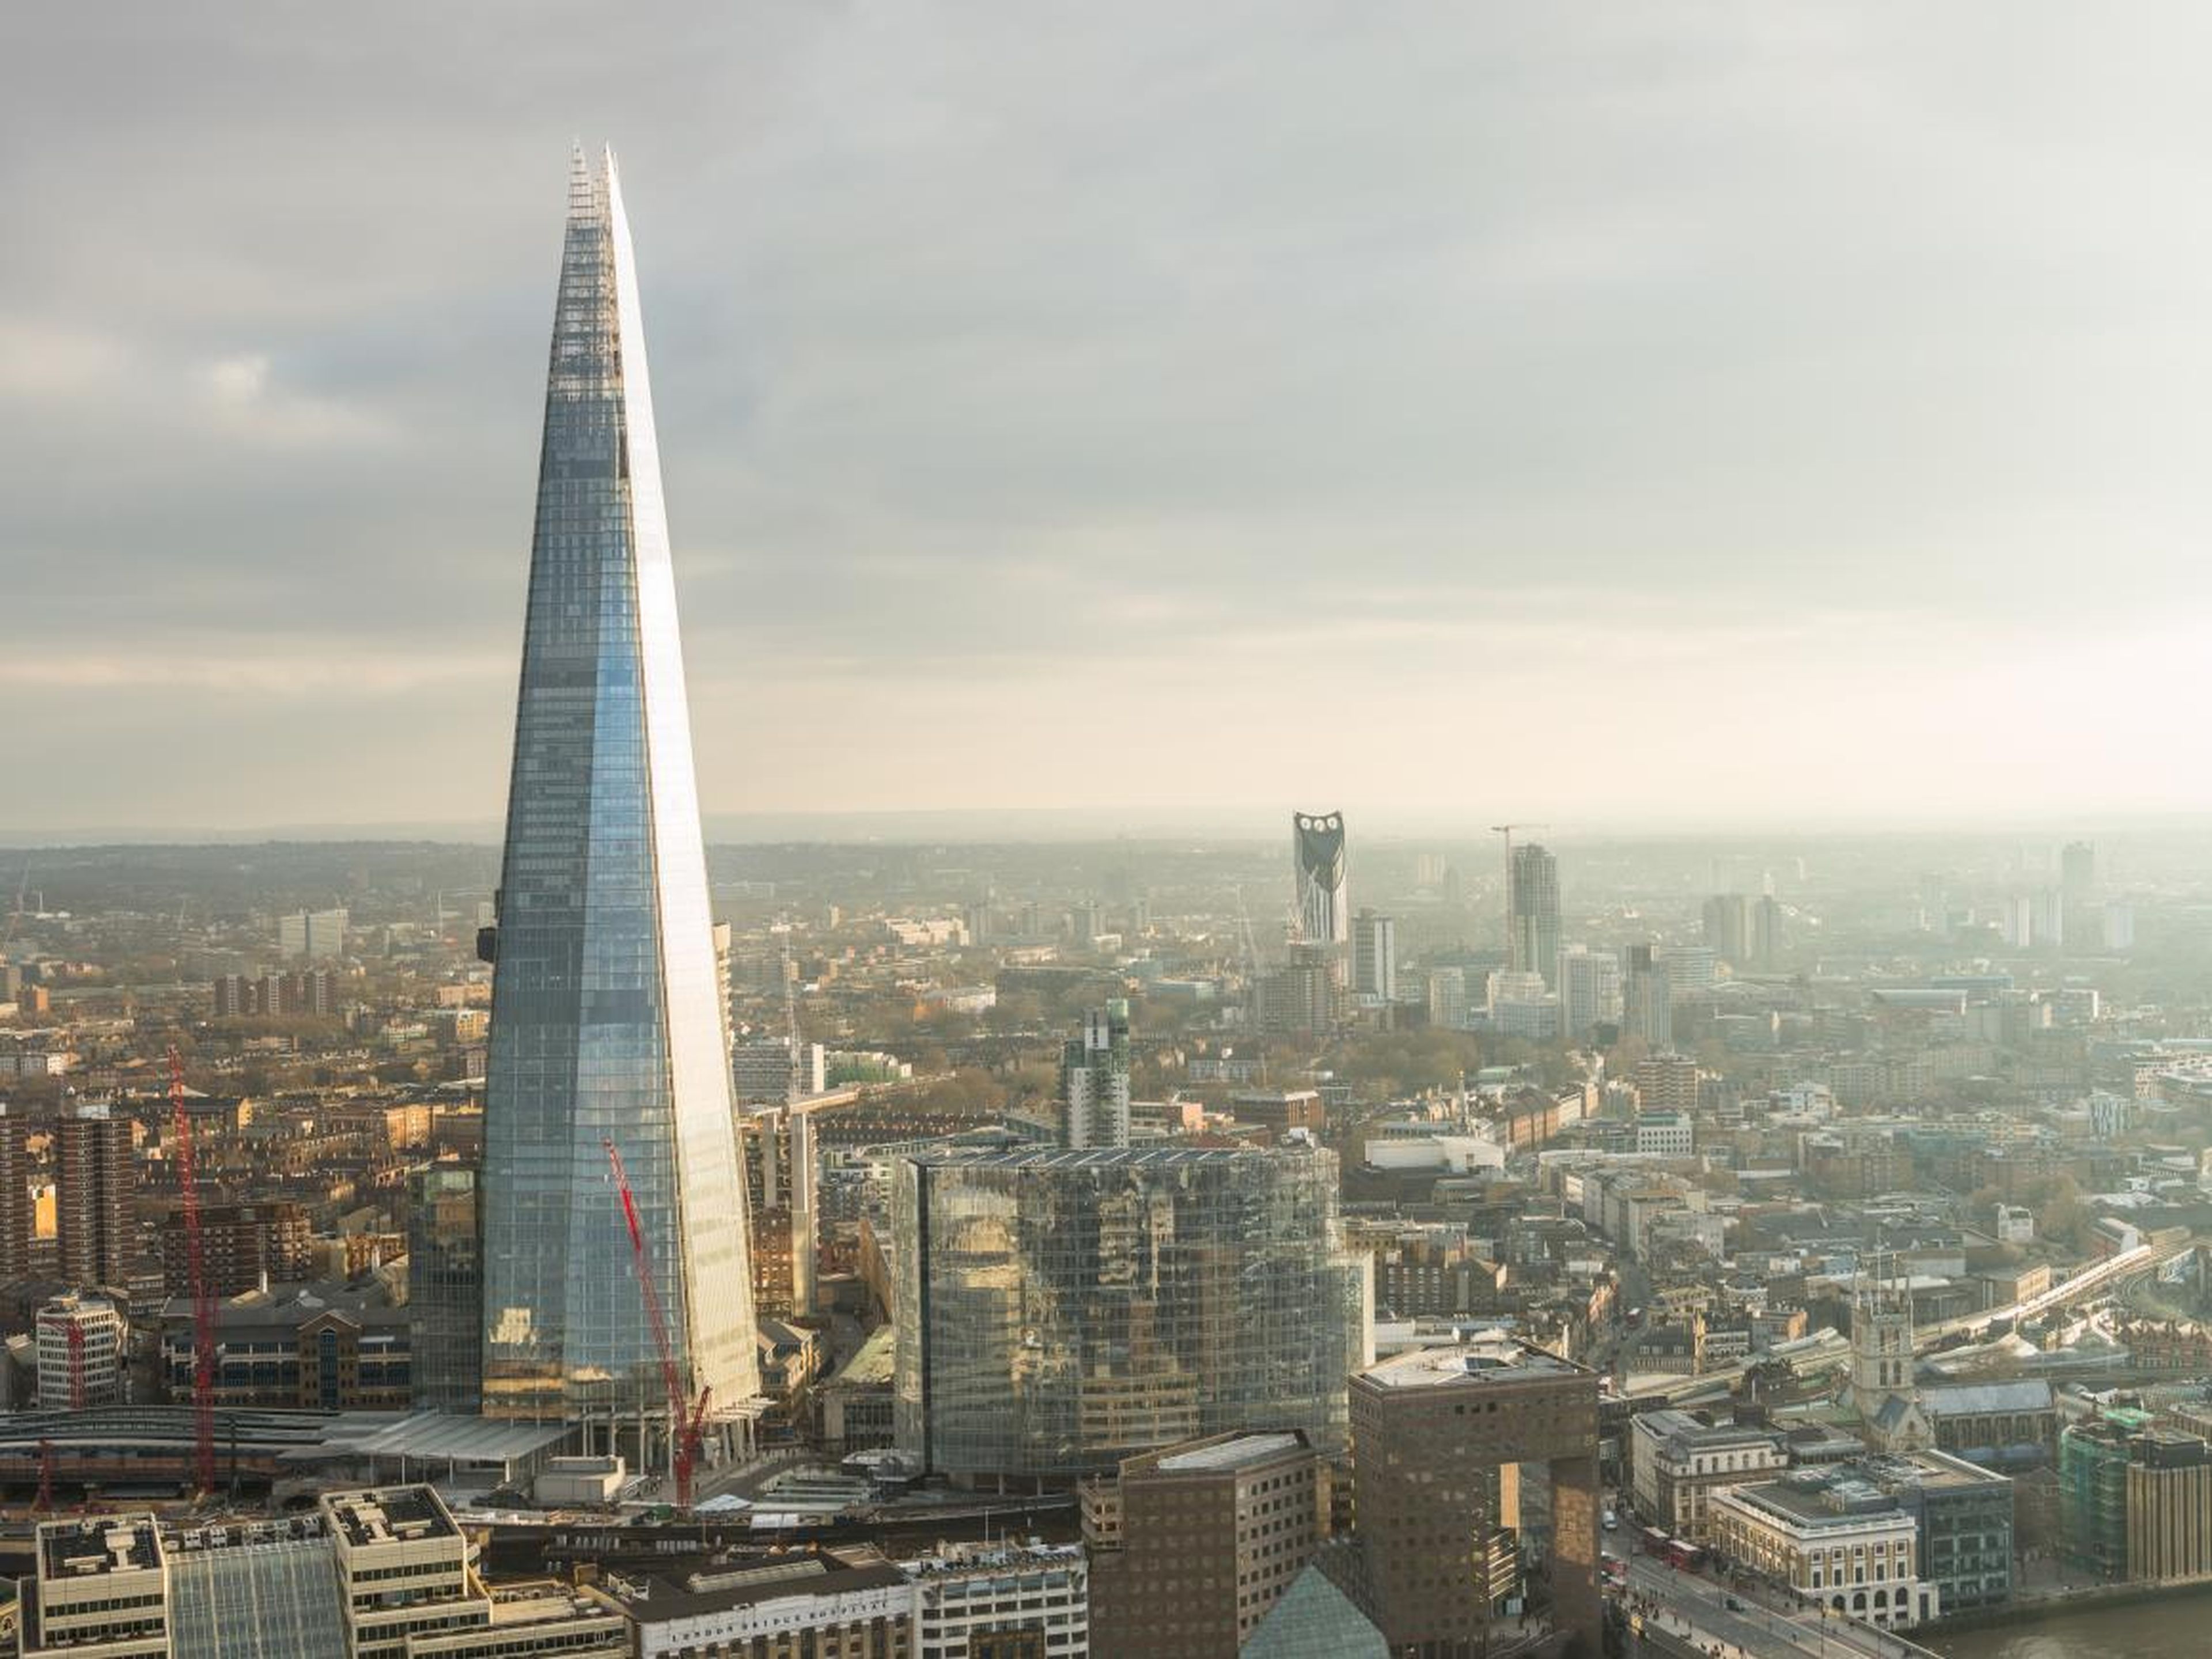 London's glass Shard, completed in 2012 for $1.5 billion, is a 95-story skyscraper.